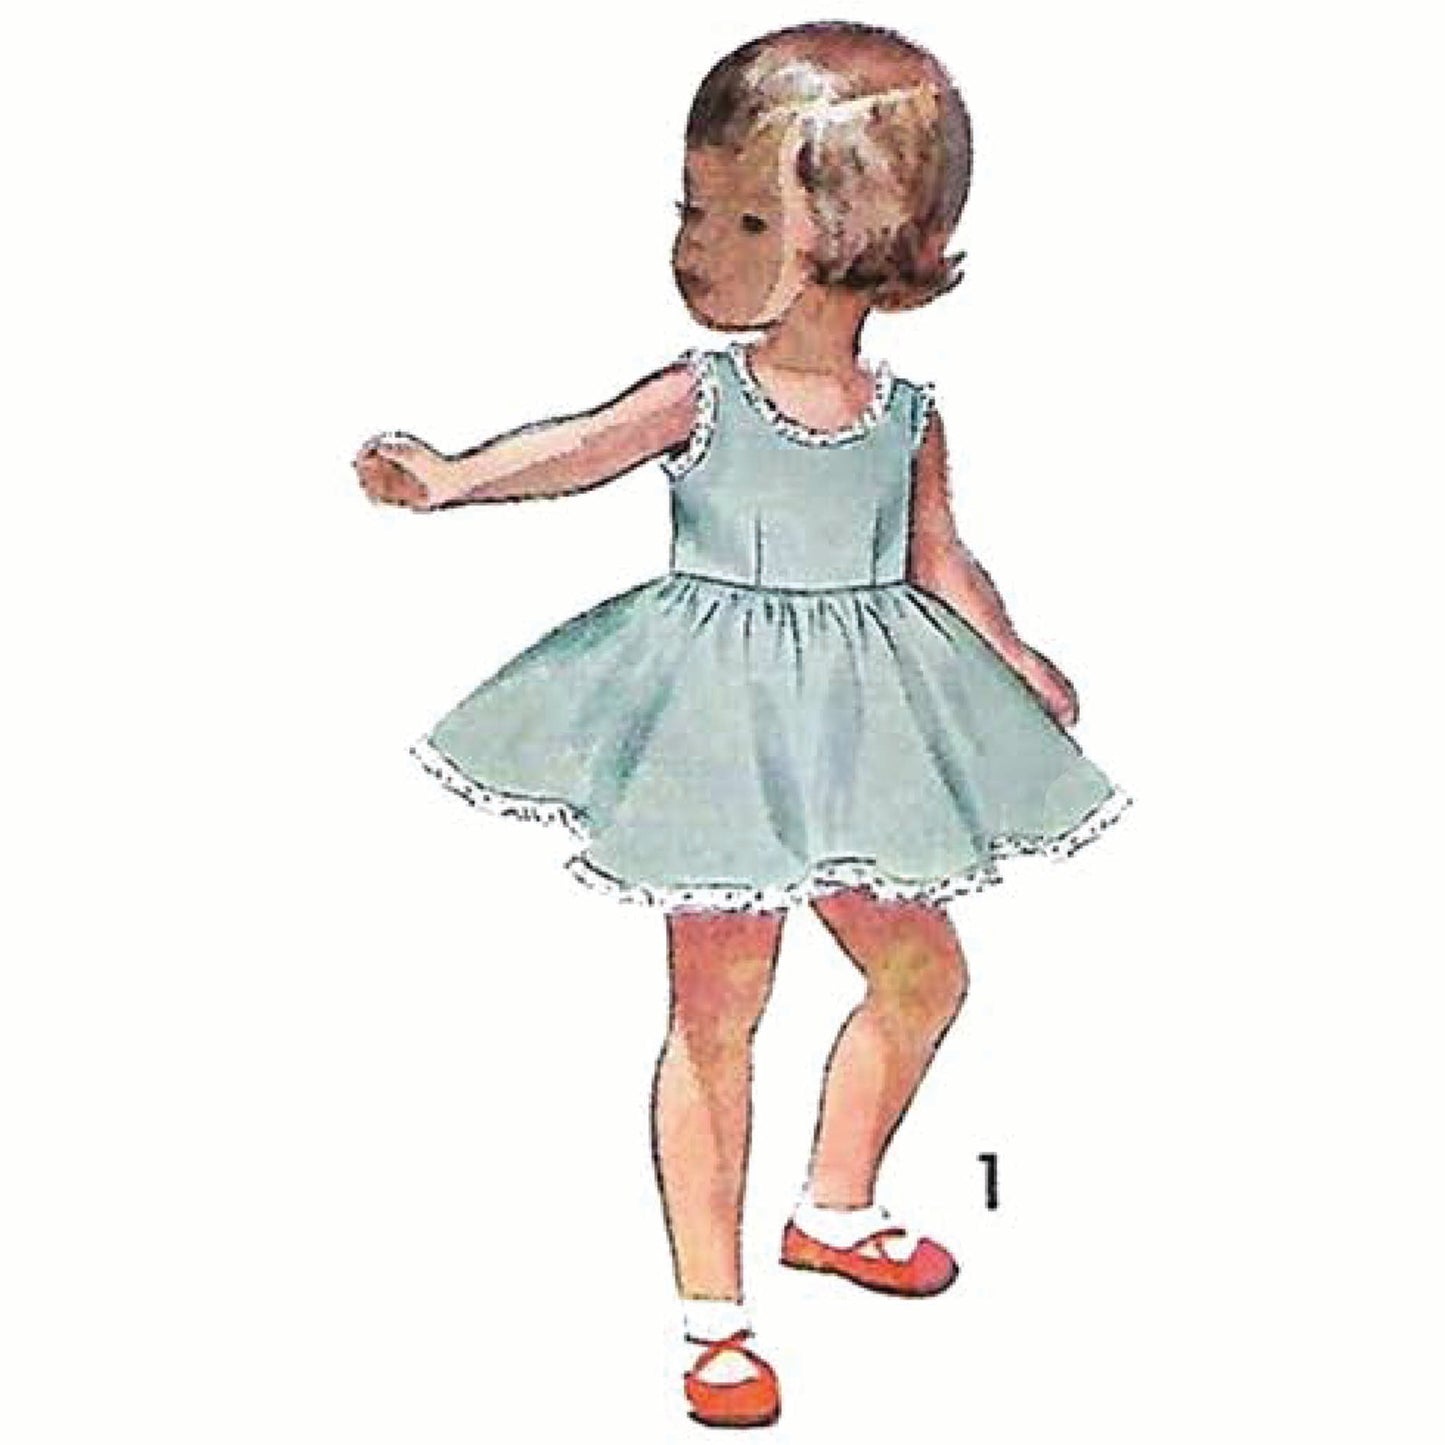 Child wearing slip dresses made using sewing pattern Simplicity 3296